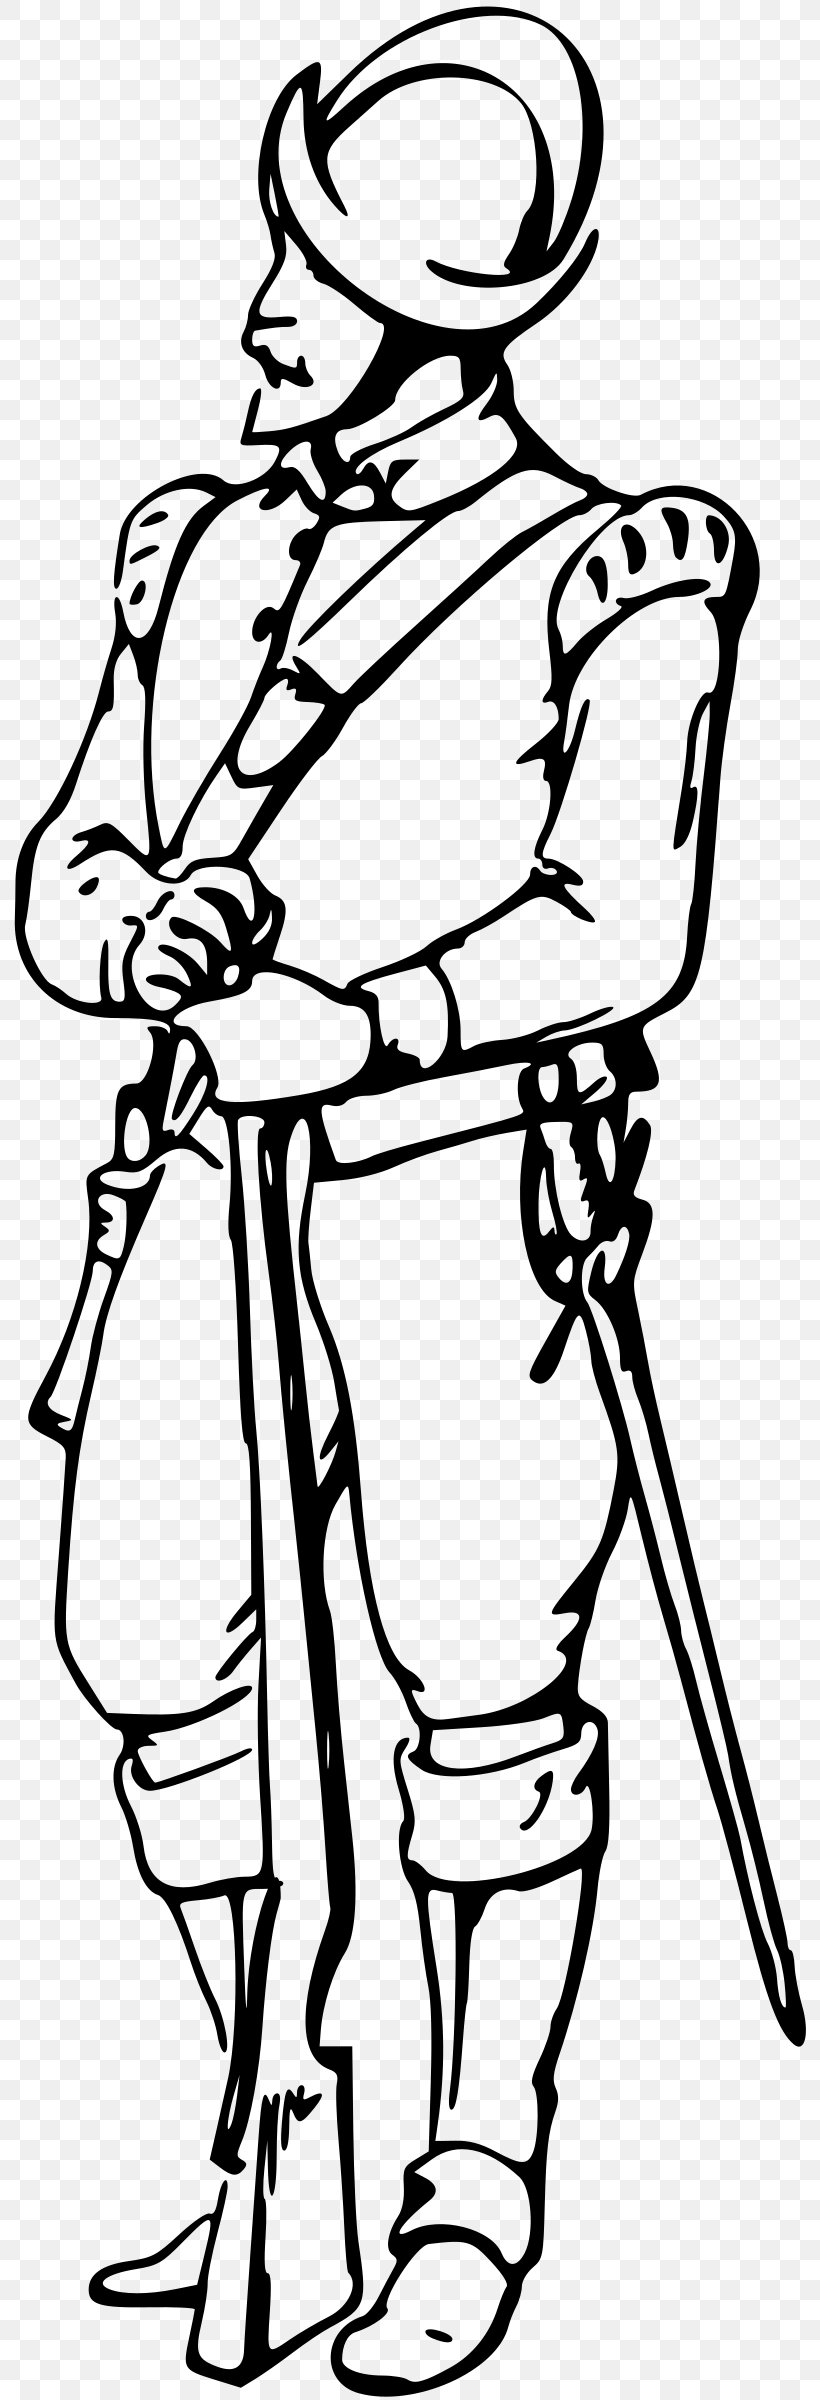 Musketeer Soldier Clip Art, PNG, 797x2400px, Musketeer, Art, Artwork, Black, Black And White Download Free